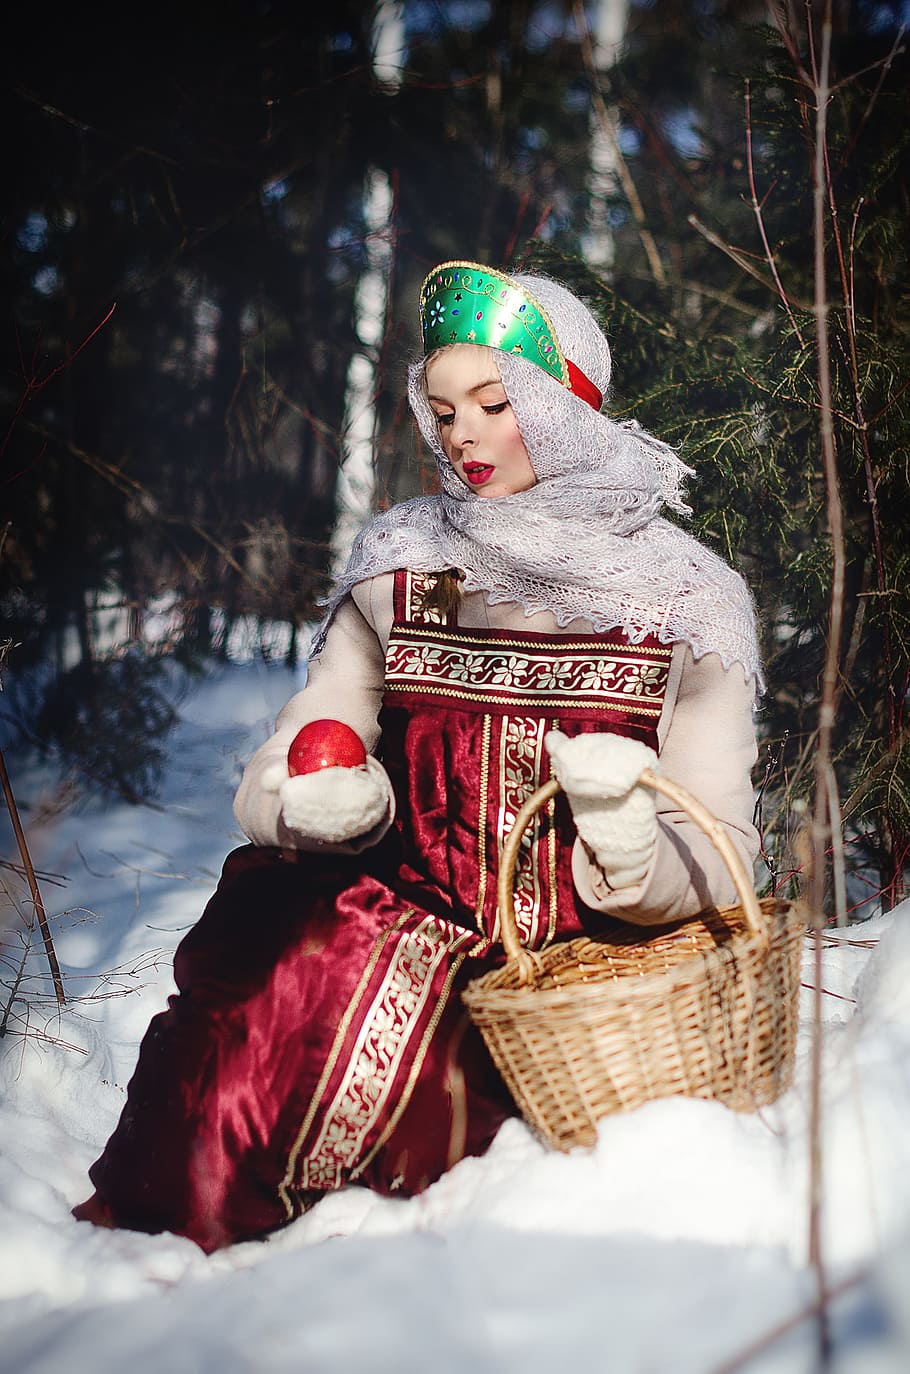 woman sitting on snow holding red apple, winter, christmas, coldly